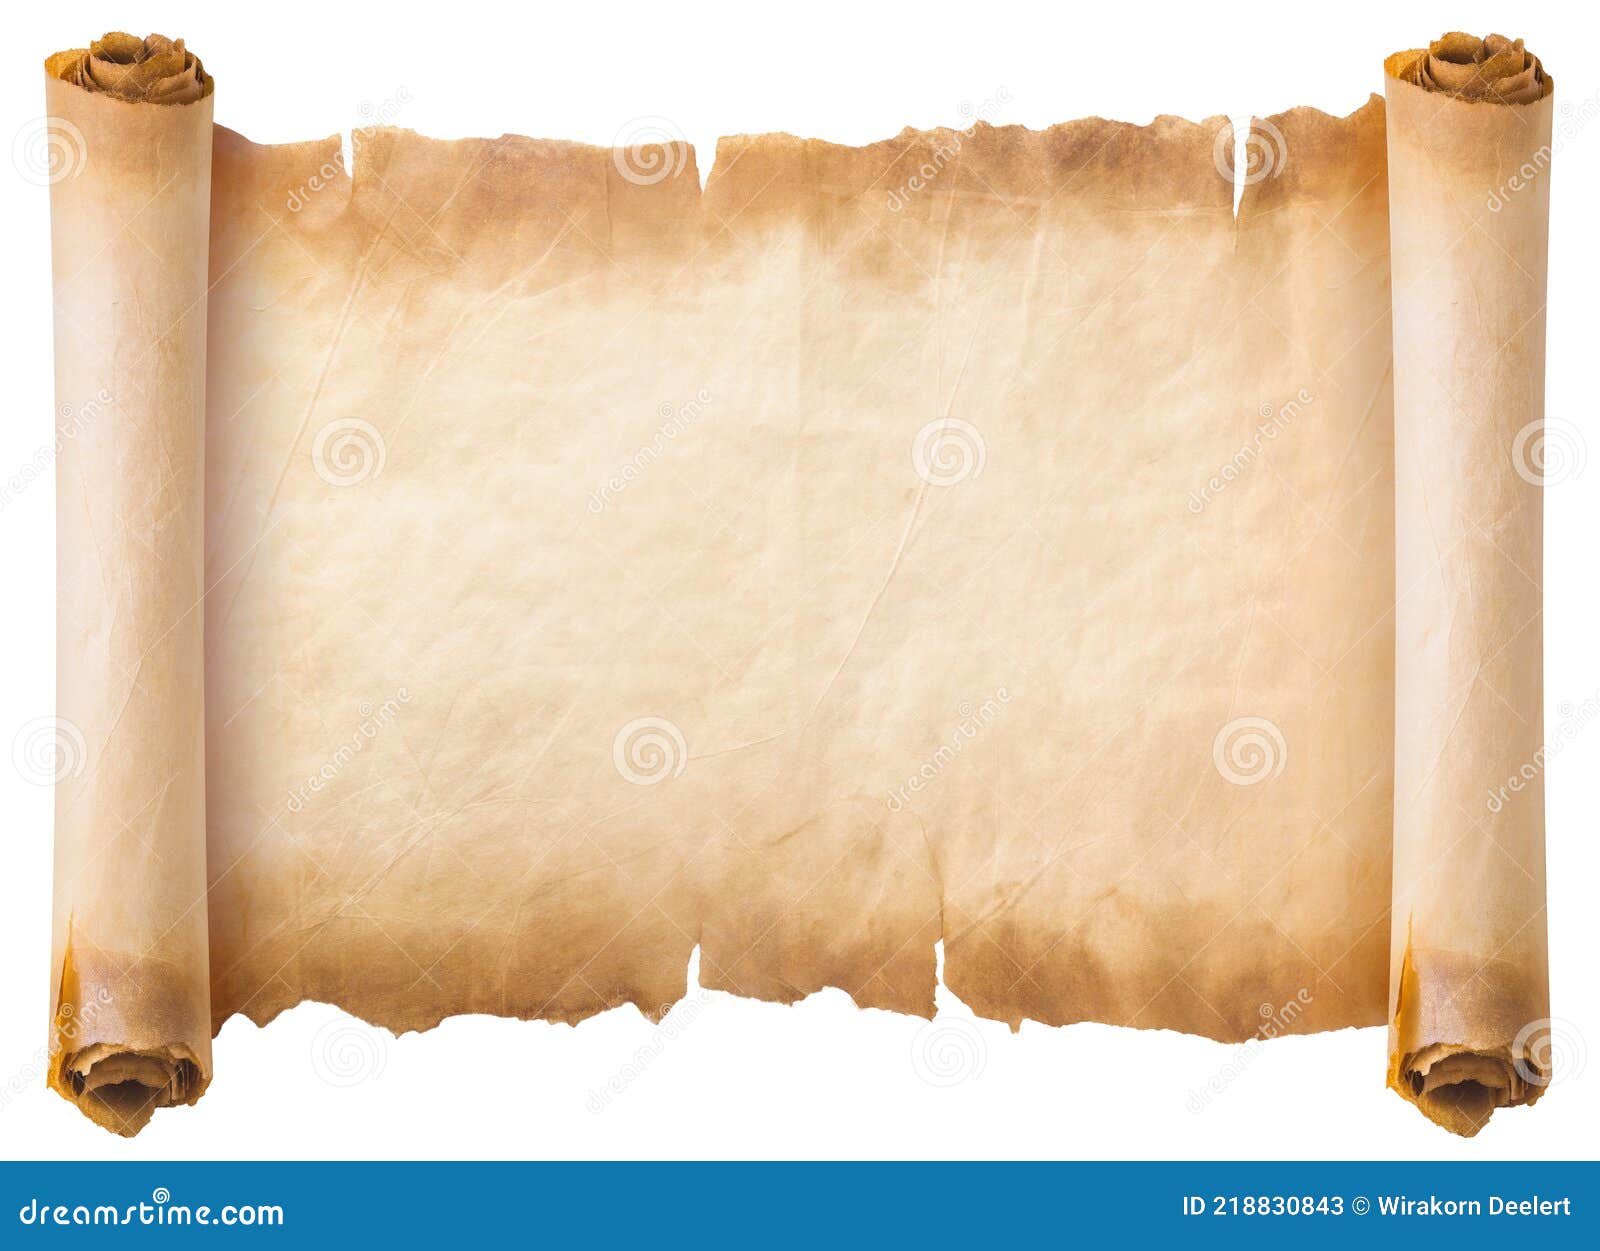 old parchment paper scroll sheet vintage aged or texture